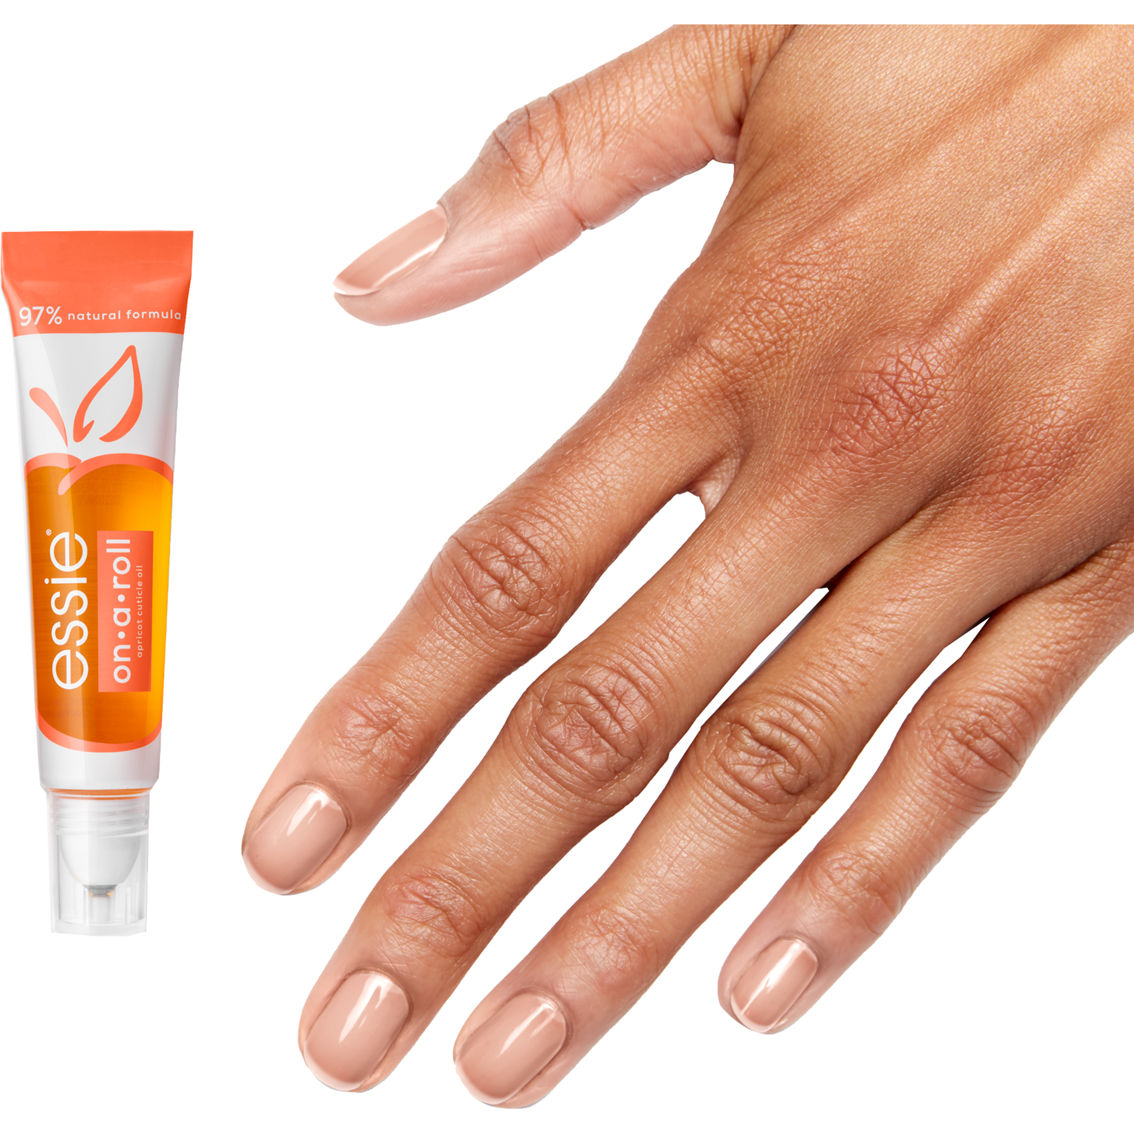 Essie Nail Care On a Roll Apricot Cuticle Oil - Image 5 of 6